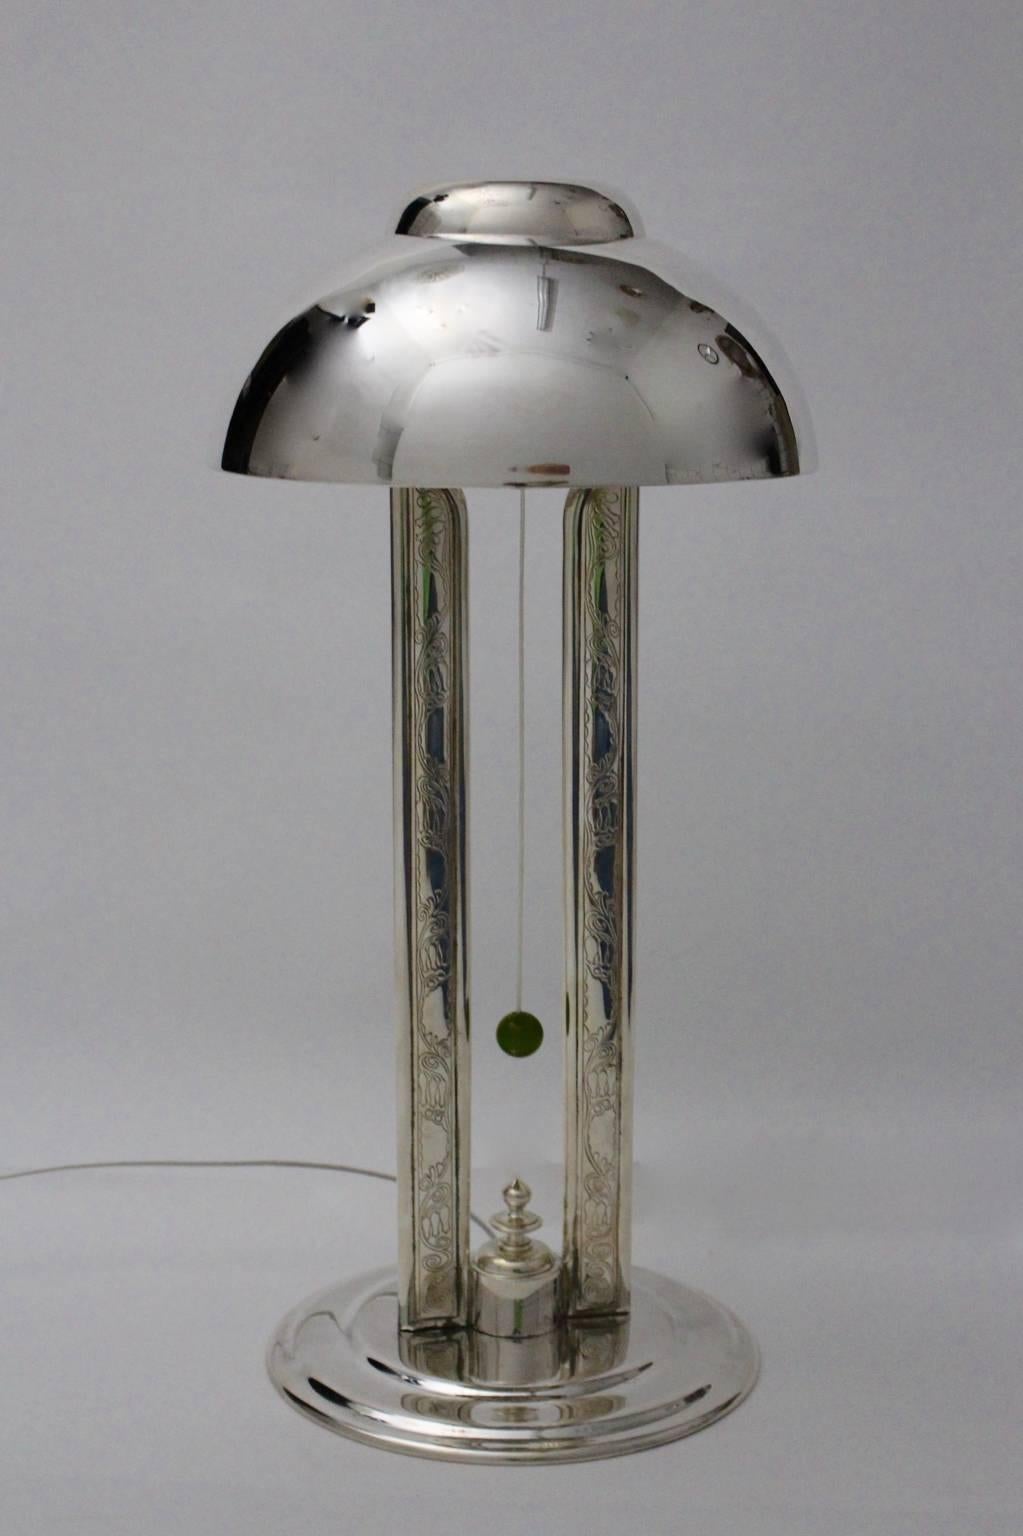 Rare elegant handmade table lamp, which is silver plated and partly provided with ornaments on the pilaster stripes.

Also the table lamp shows a pull switch with a green bakelite ball.
Additionally the table lamp features one socket E 27.
Best